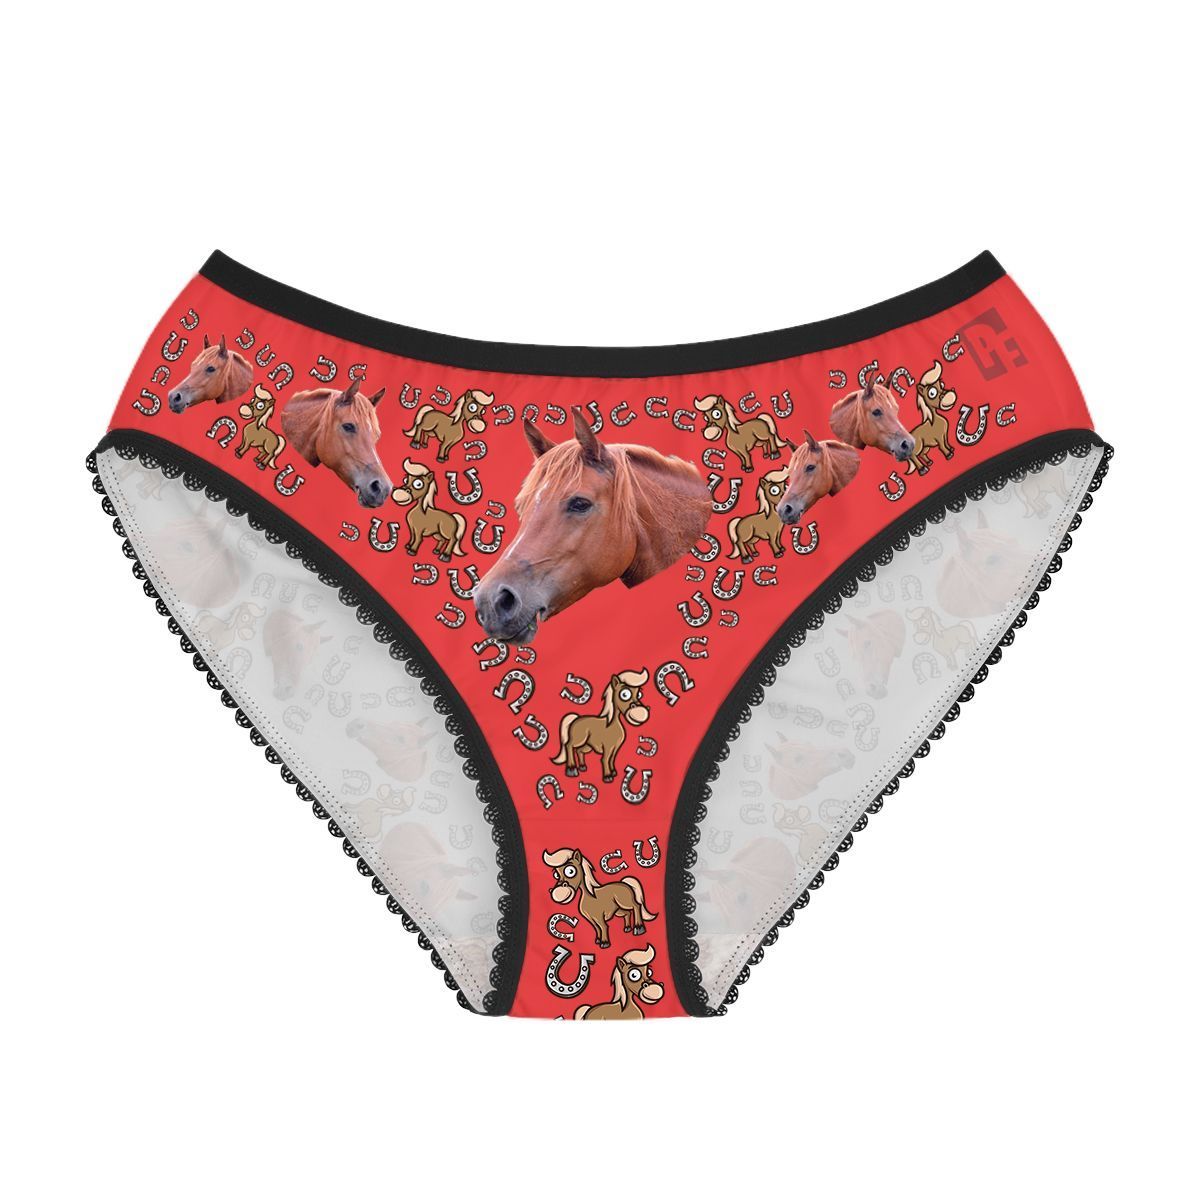 Red Horse women's underwear briefs personalized with photo printed on them